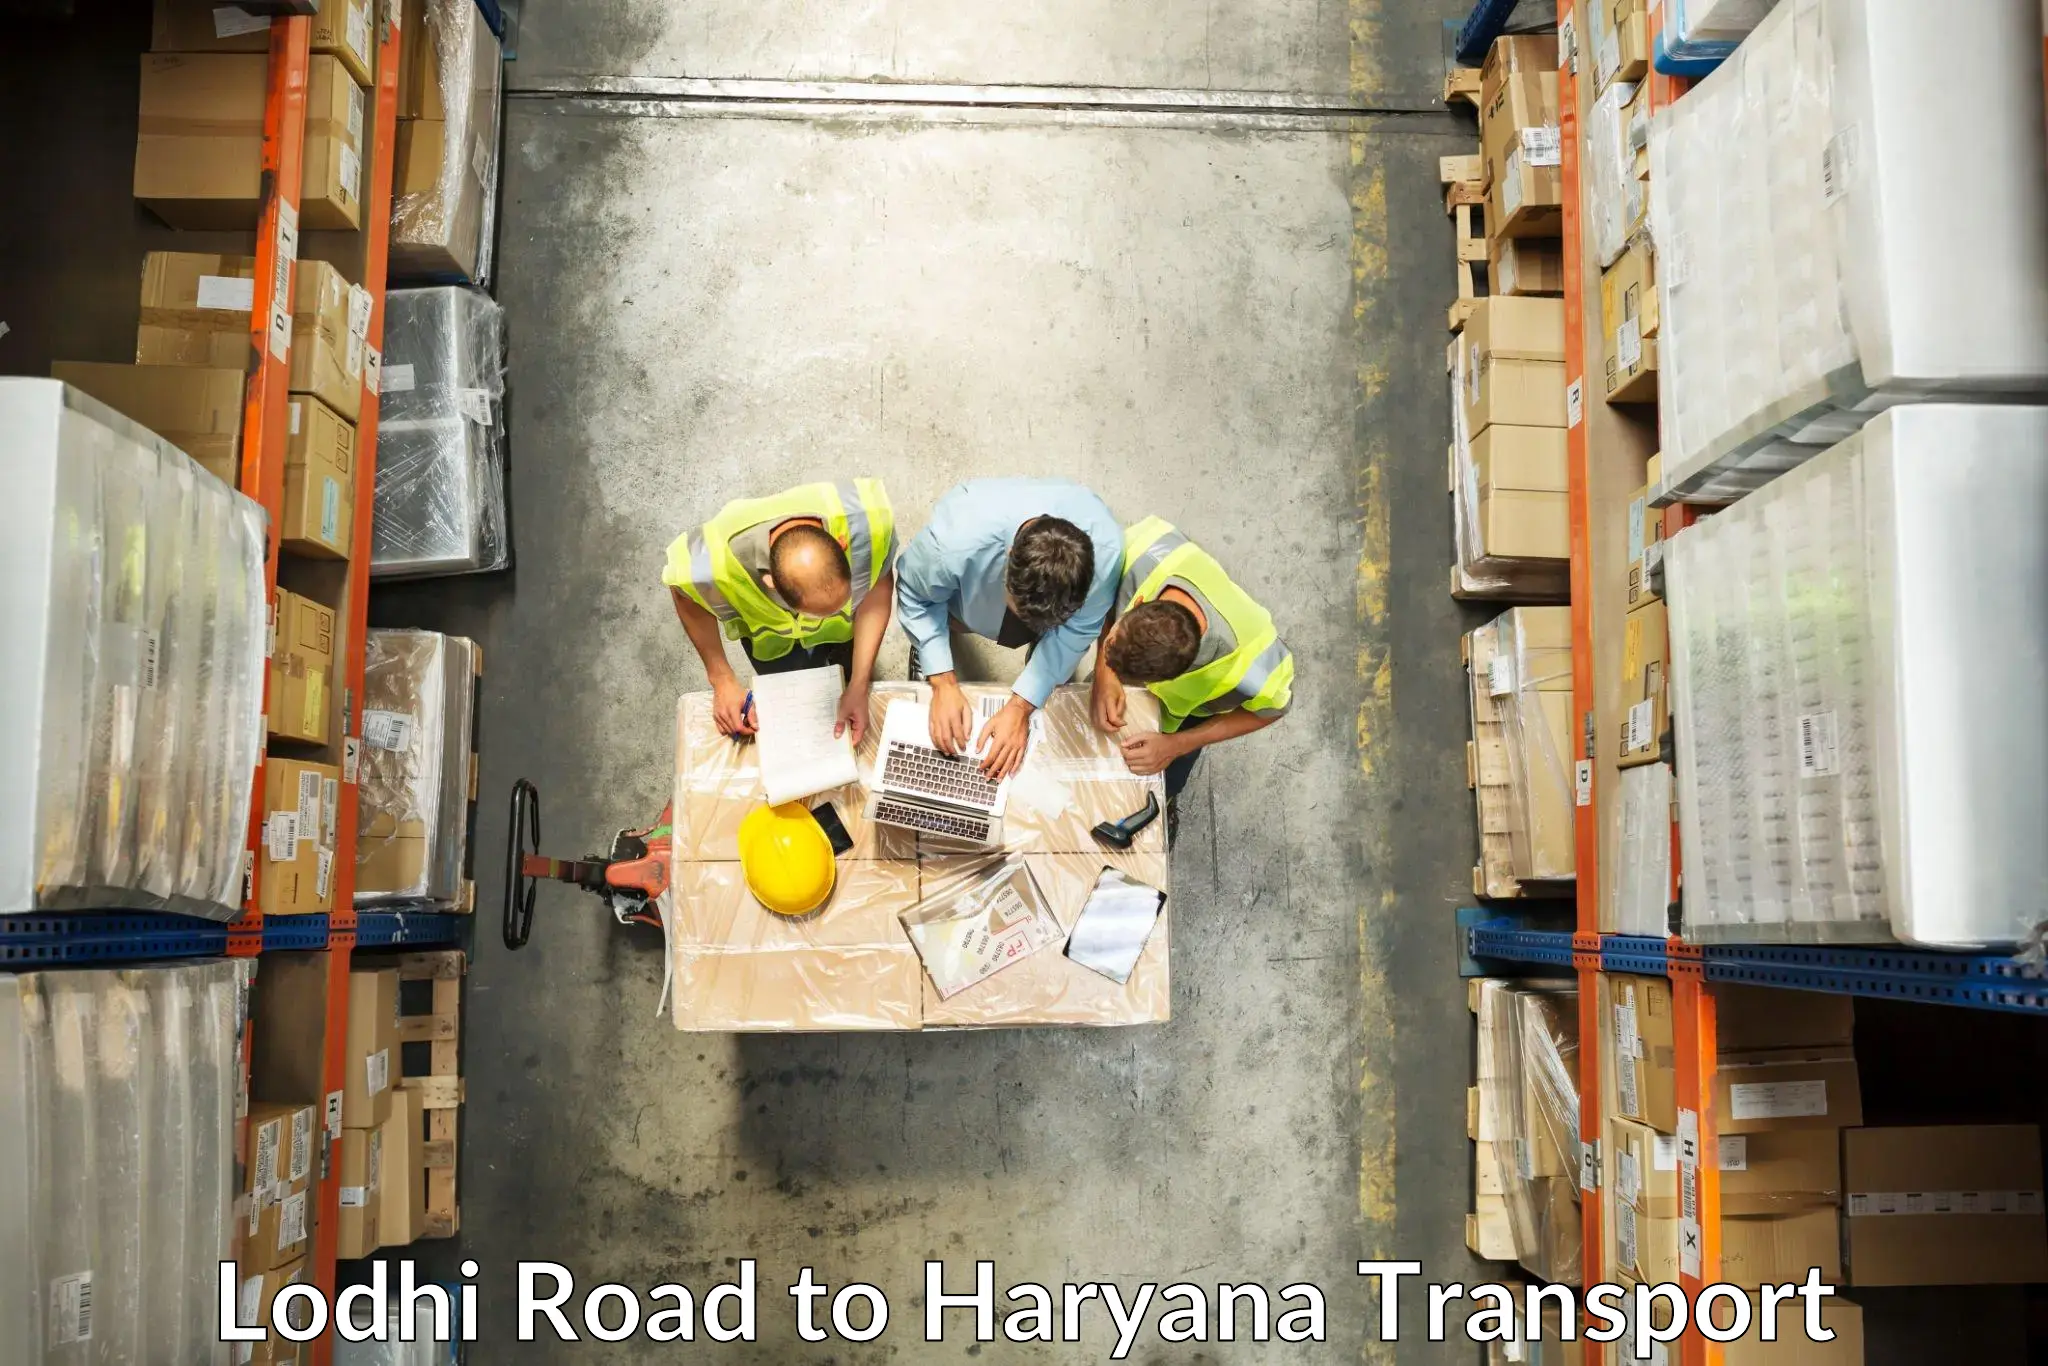 Part load transport service in India Lodhi Road to NCR Haryana